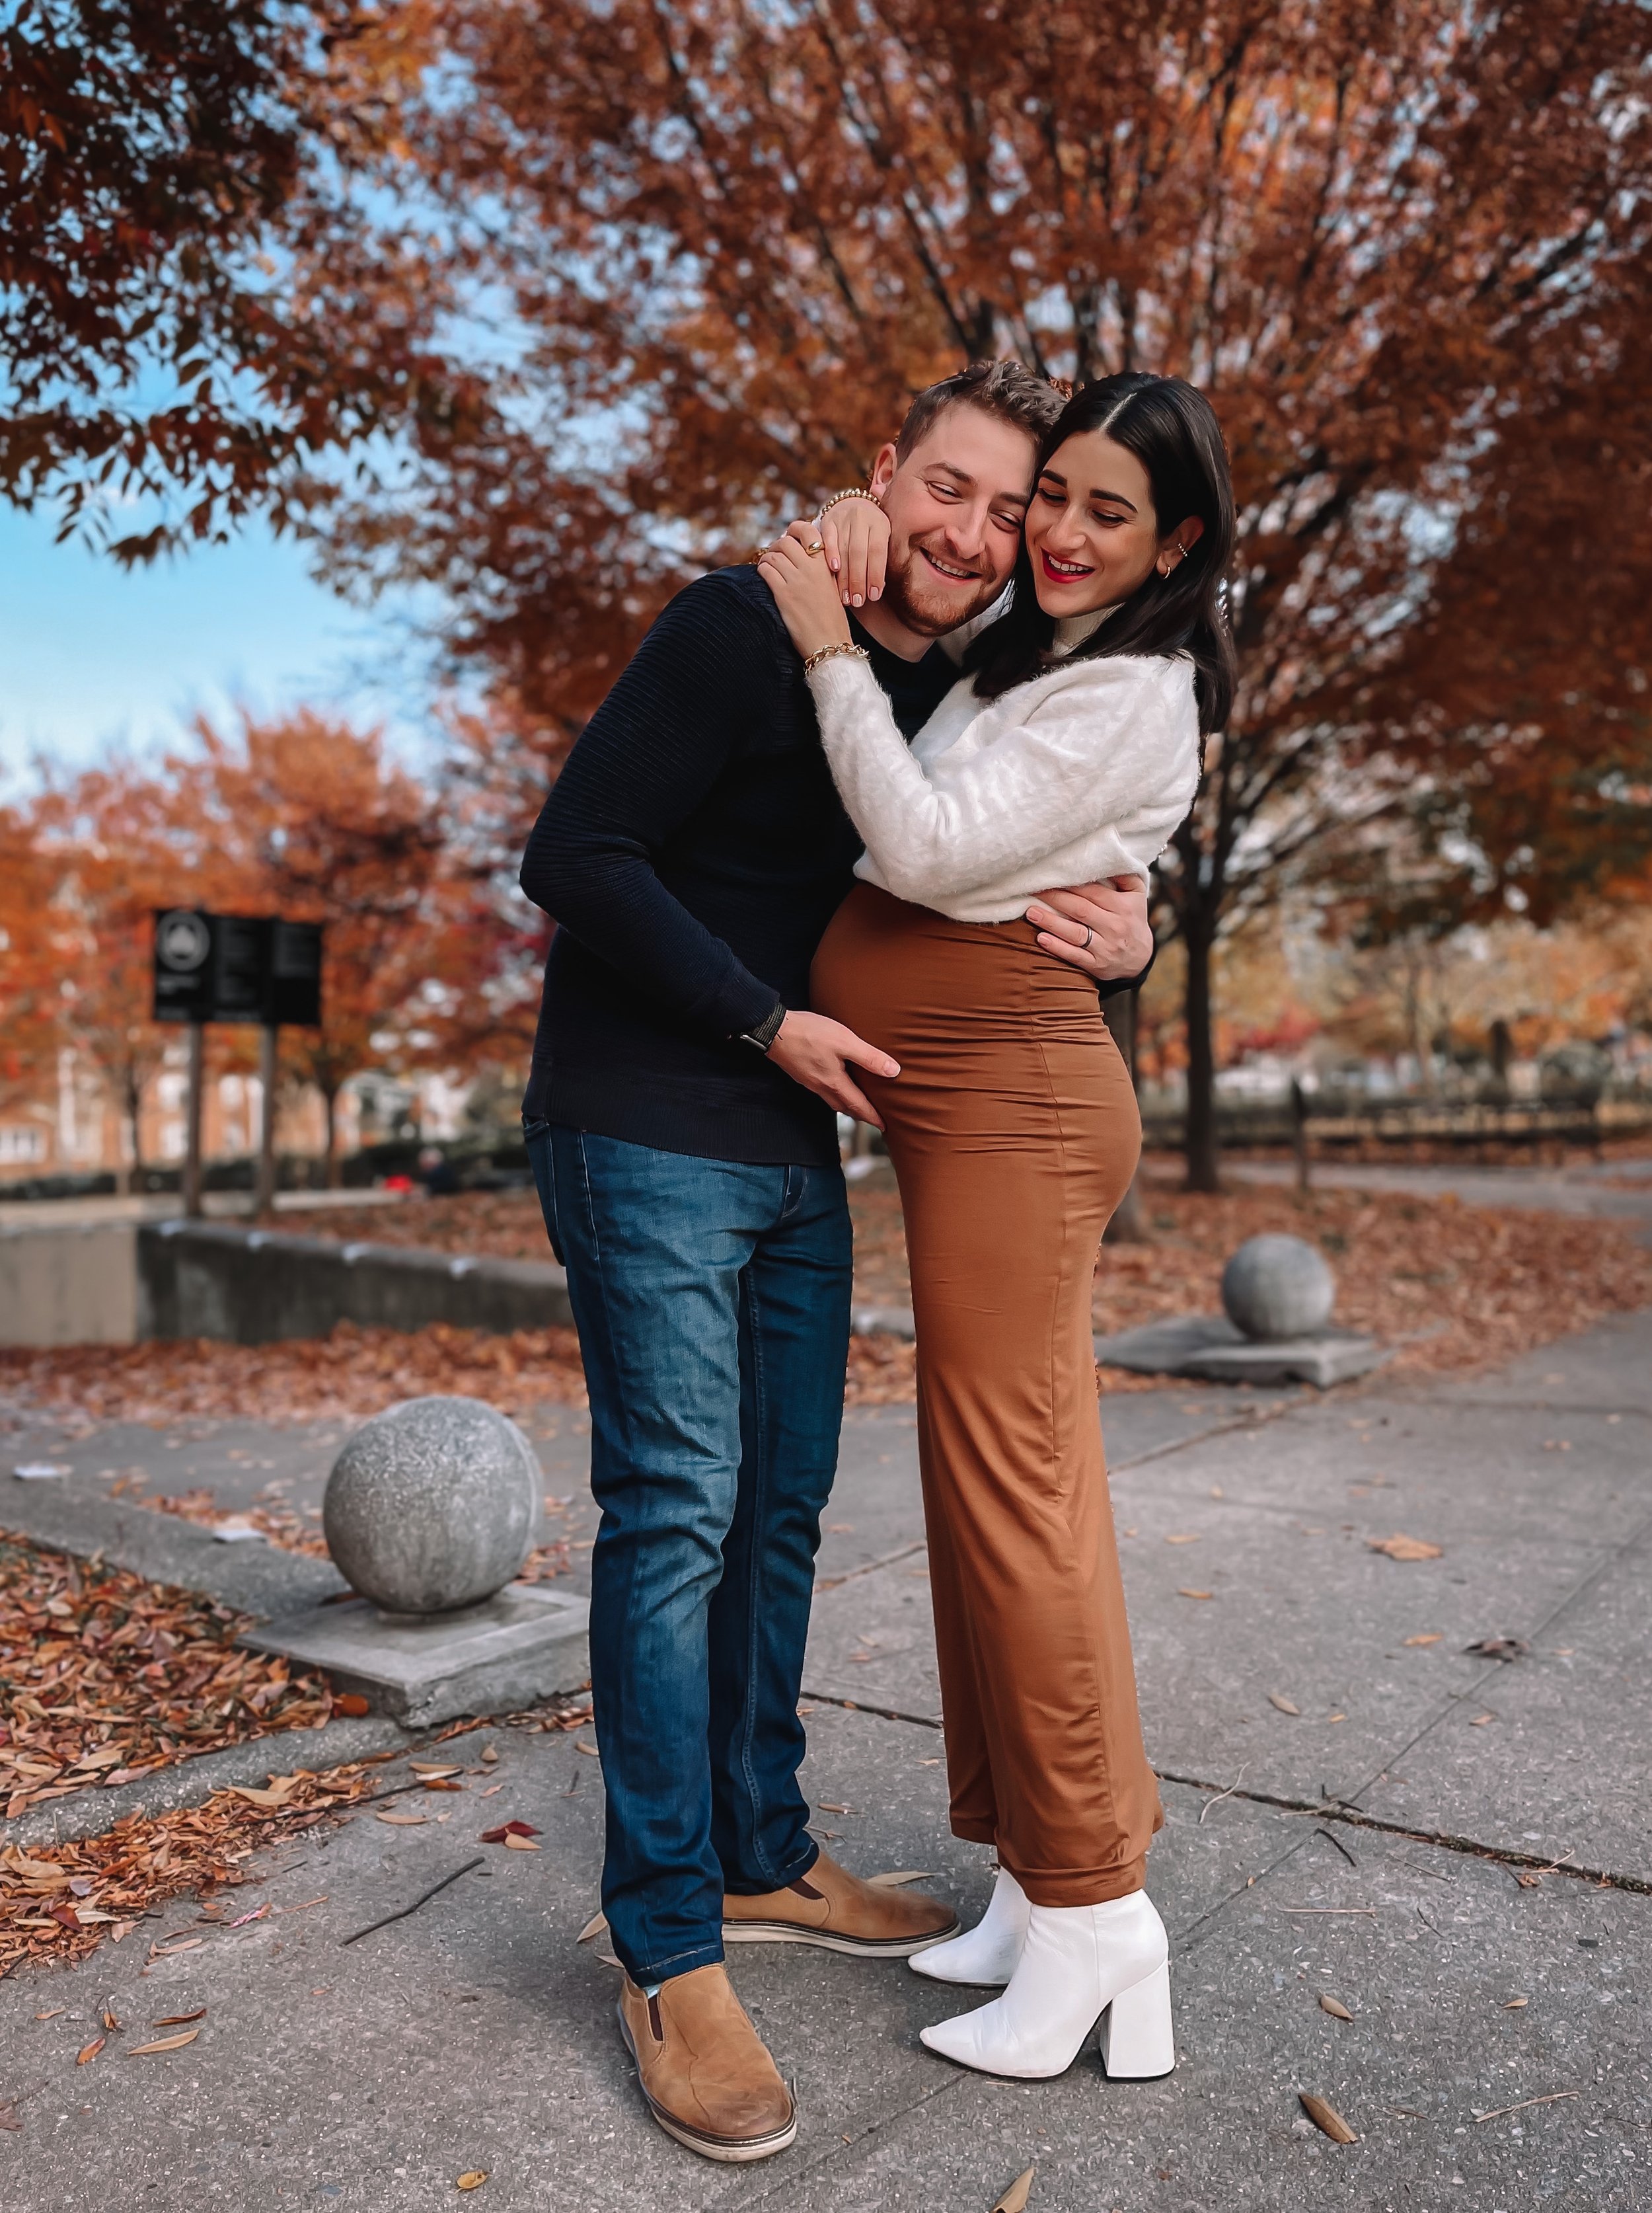 Esther Santer NYC Street Style Fashion Blogger Pregnancy Update Belly Progress 39 Weeks Bump Style Friendly White Boots Alias Mae Bumpsuit Toffee Sweater Husband Happy Couple IVF Success Expecting Mom To Be 2021 Baby Relationship Men Sweater Shoes.JPG